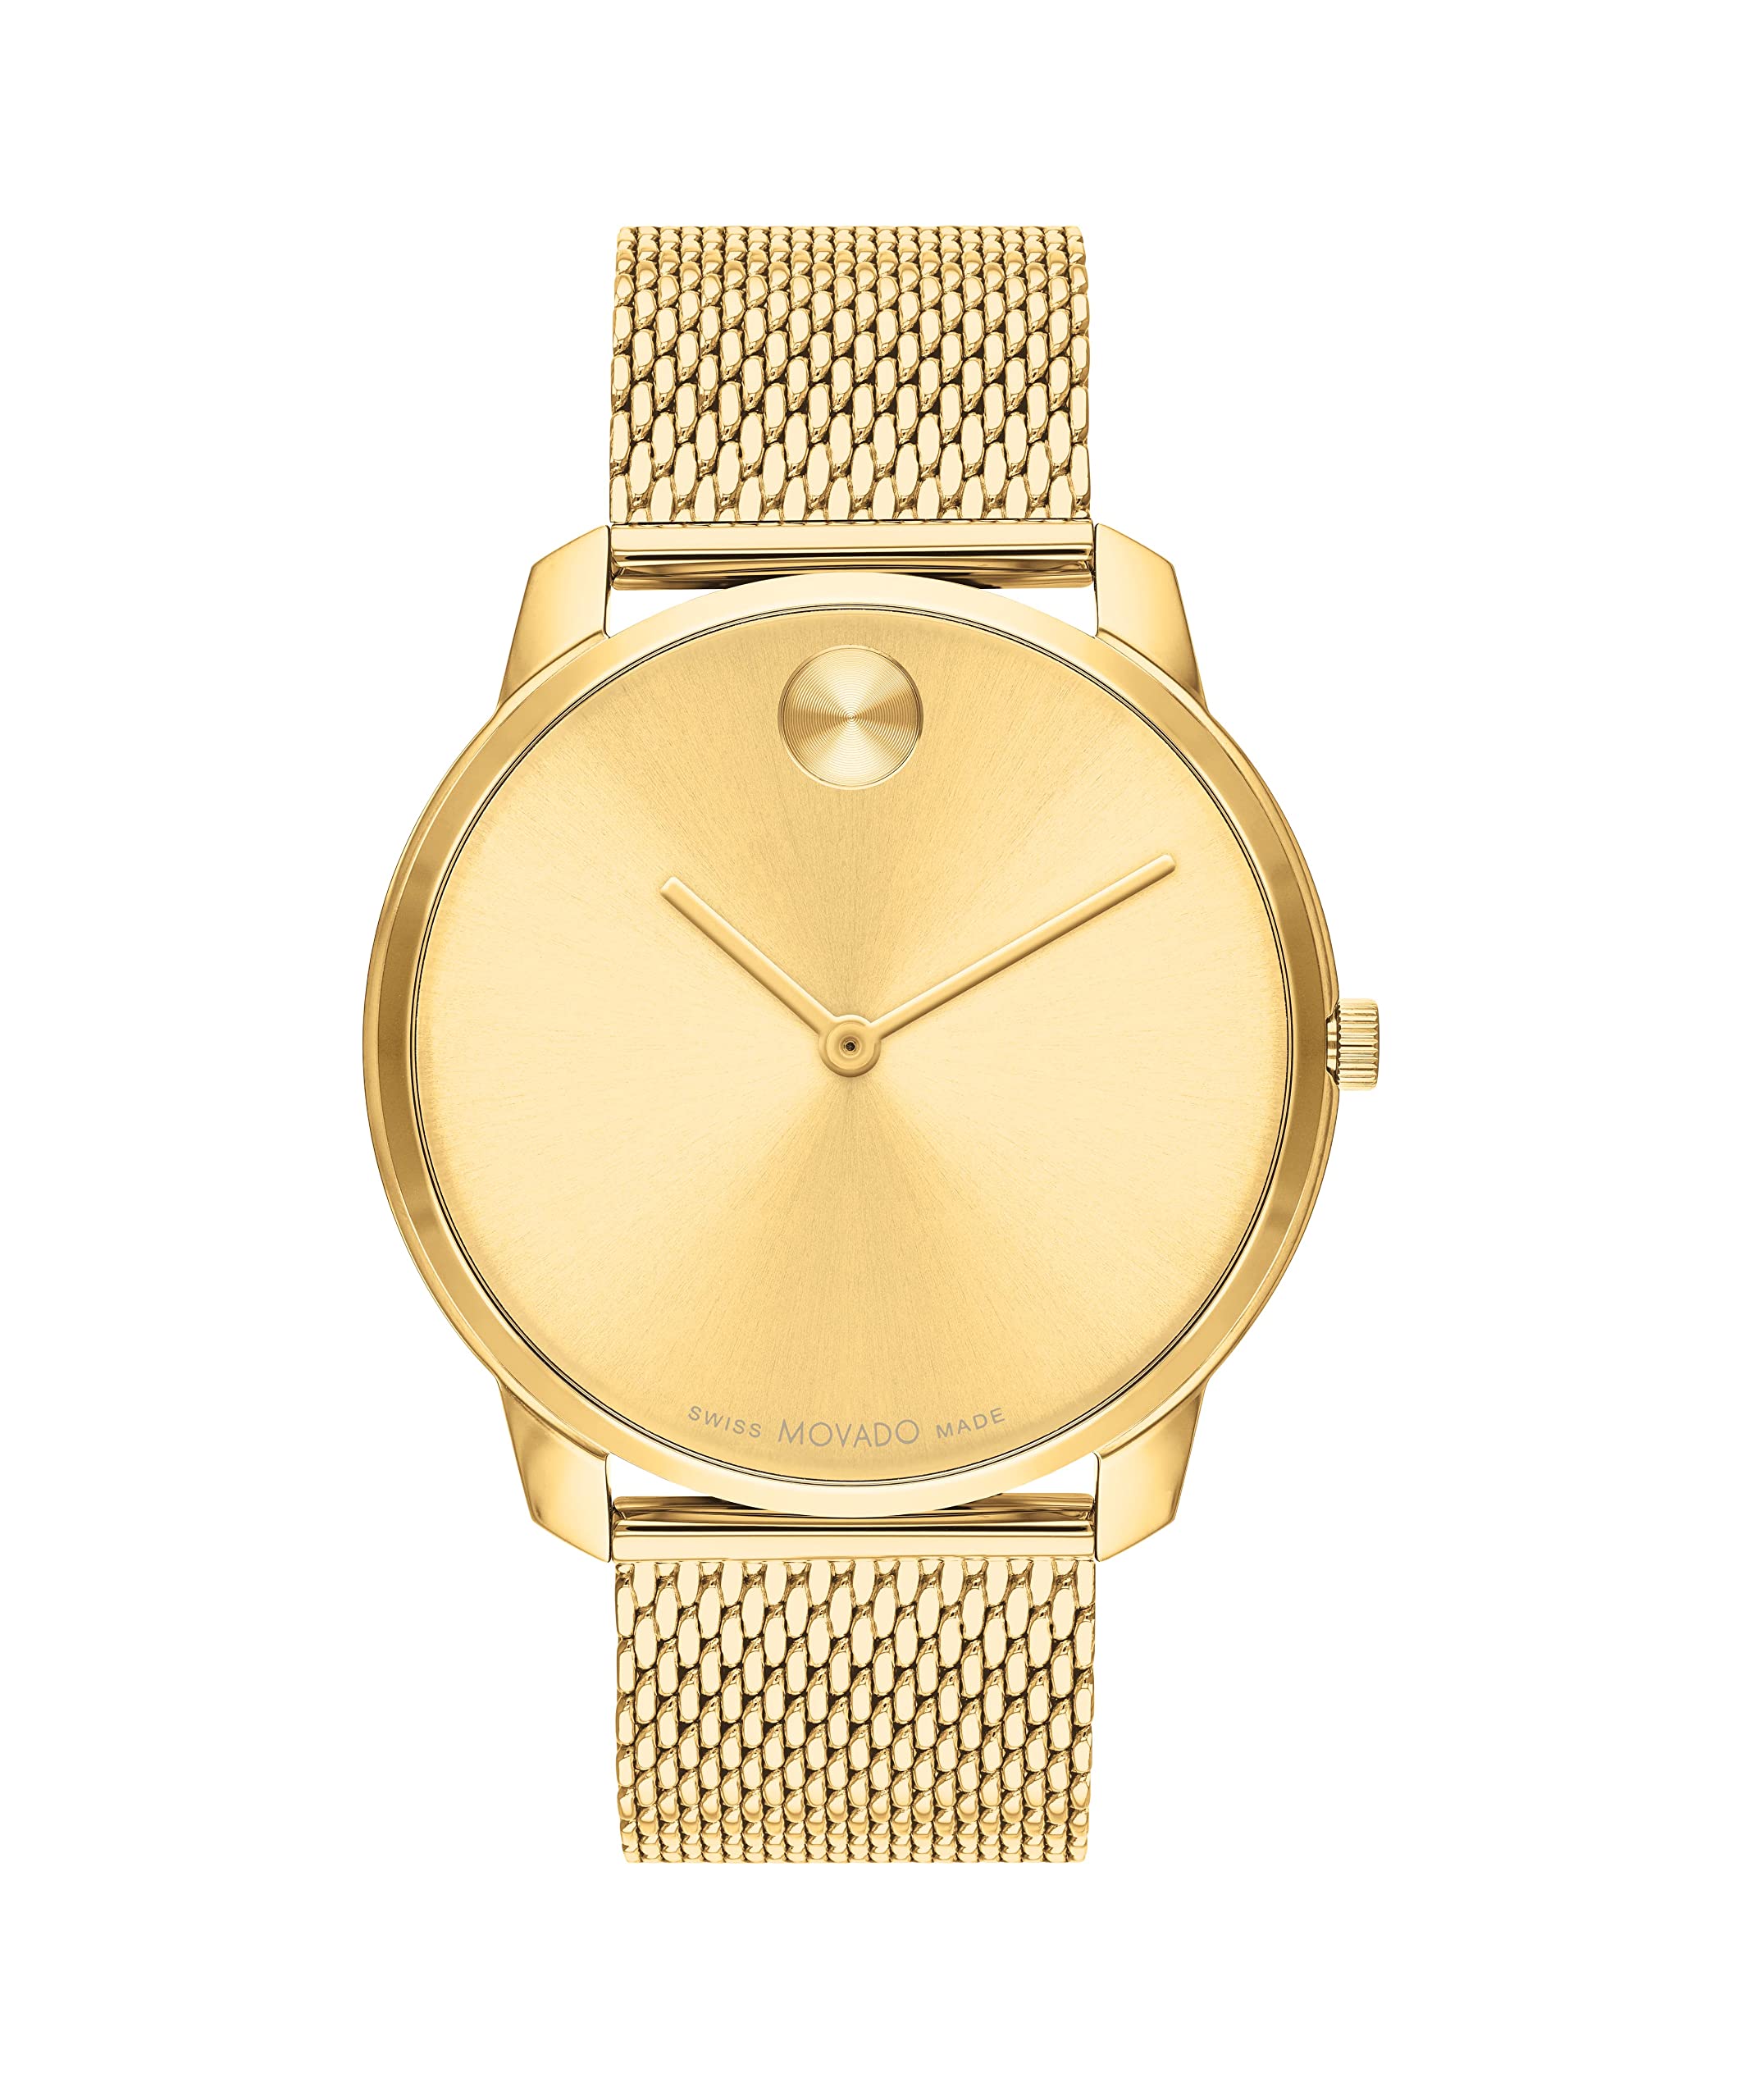 Movado Bold Men's Swiss Quartz Stainless Steel and Mesh Bracelet Watch, Color: Gold Plated (Model: 3600833)